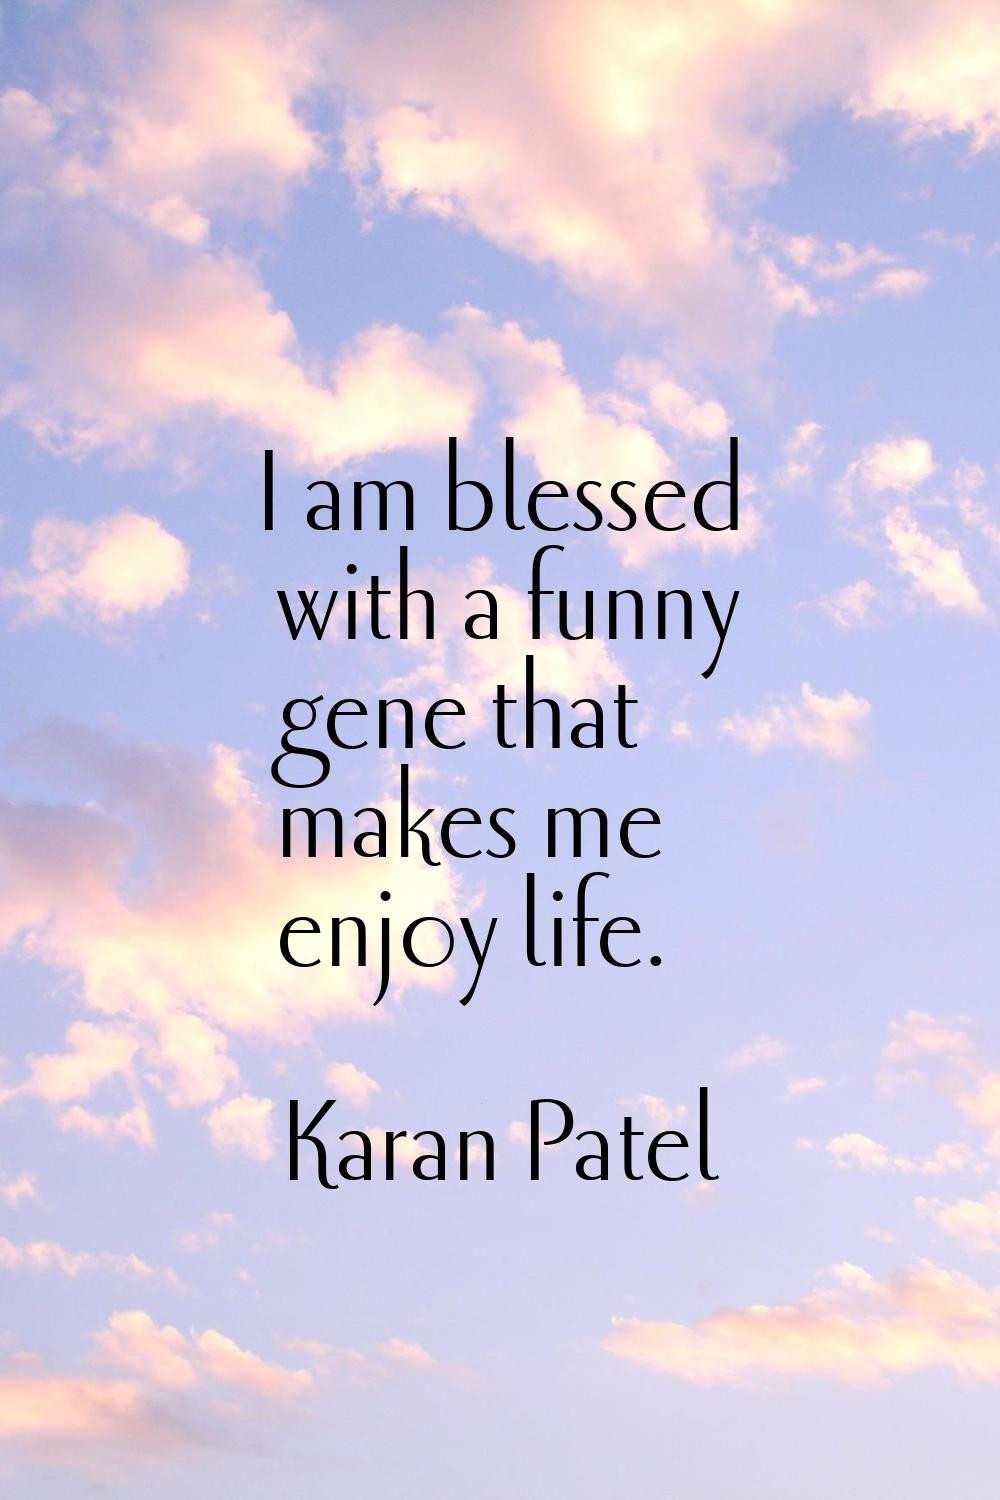 I am blessed with a funny gene that makes me enjoy life.